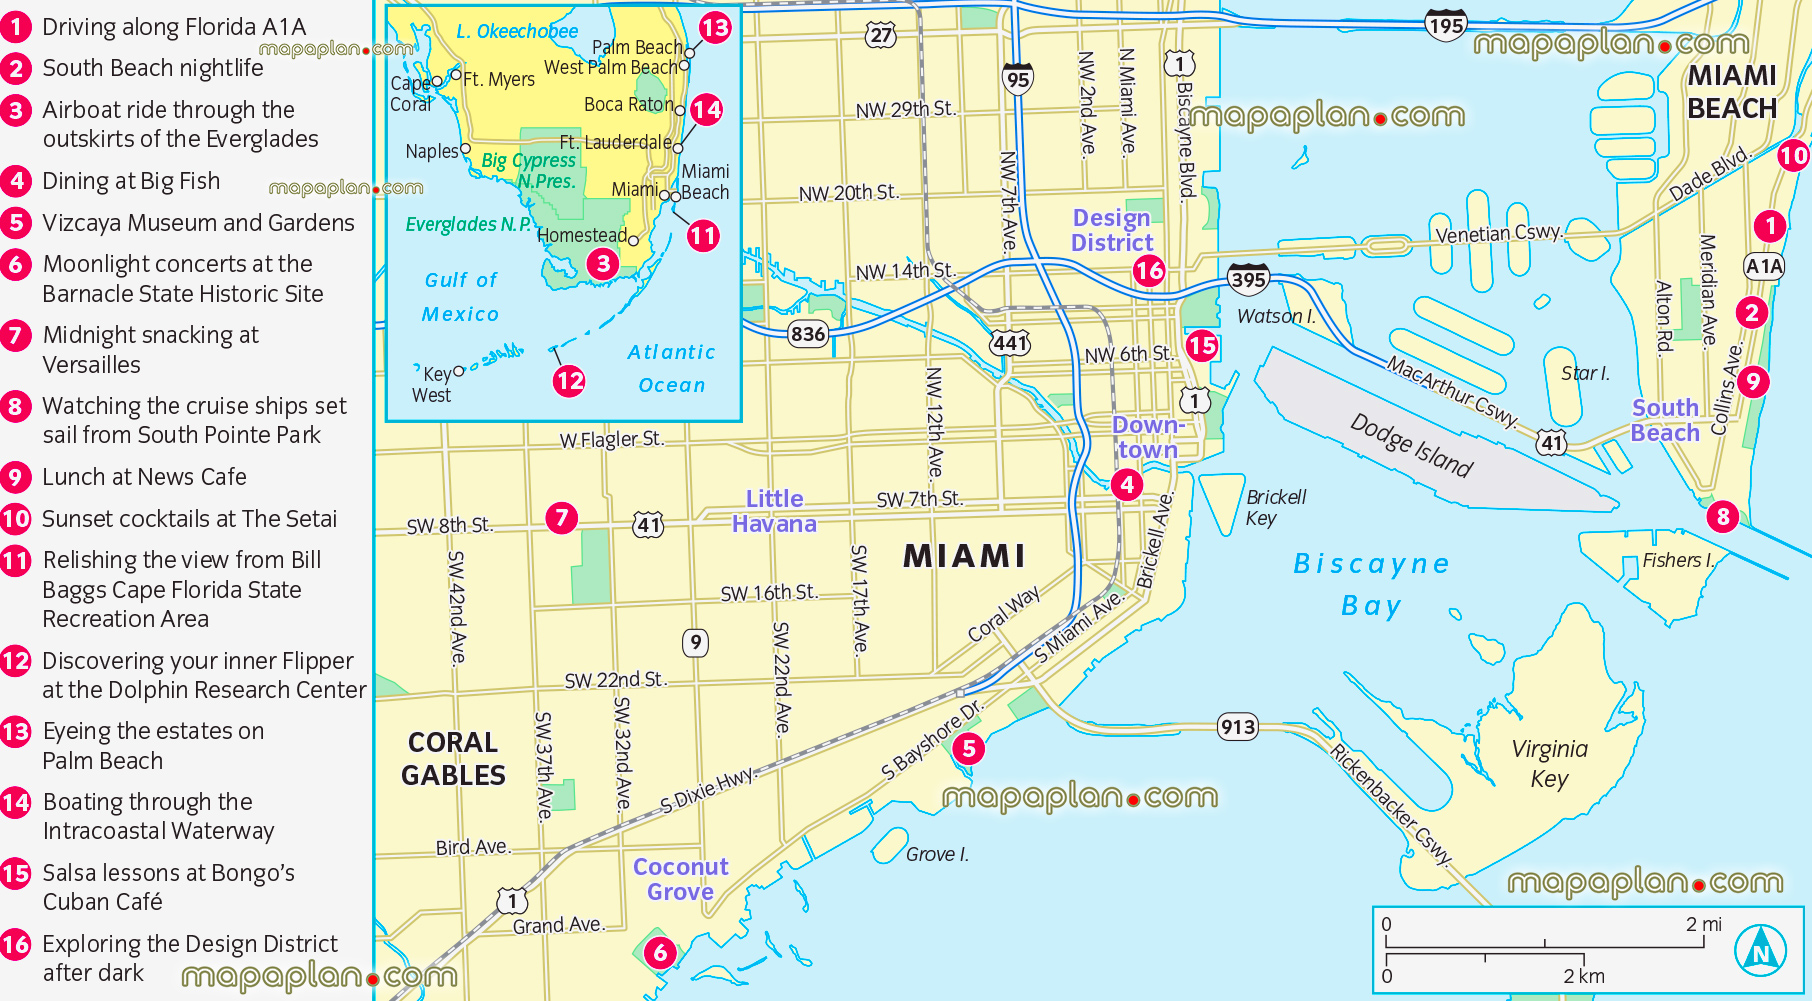 miami city florida south beach top experiences do interactive virtual street directions sightseeing places best sights destinations visit cities places worth visiting usa location miami florida usa